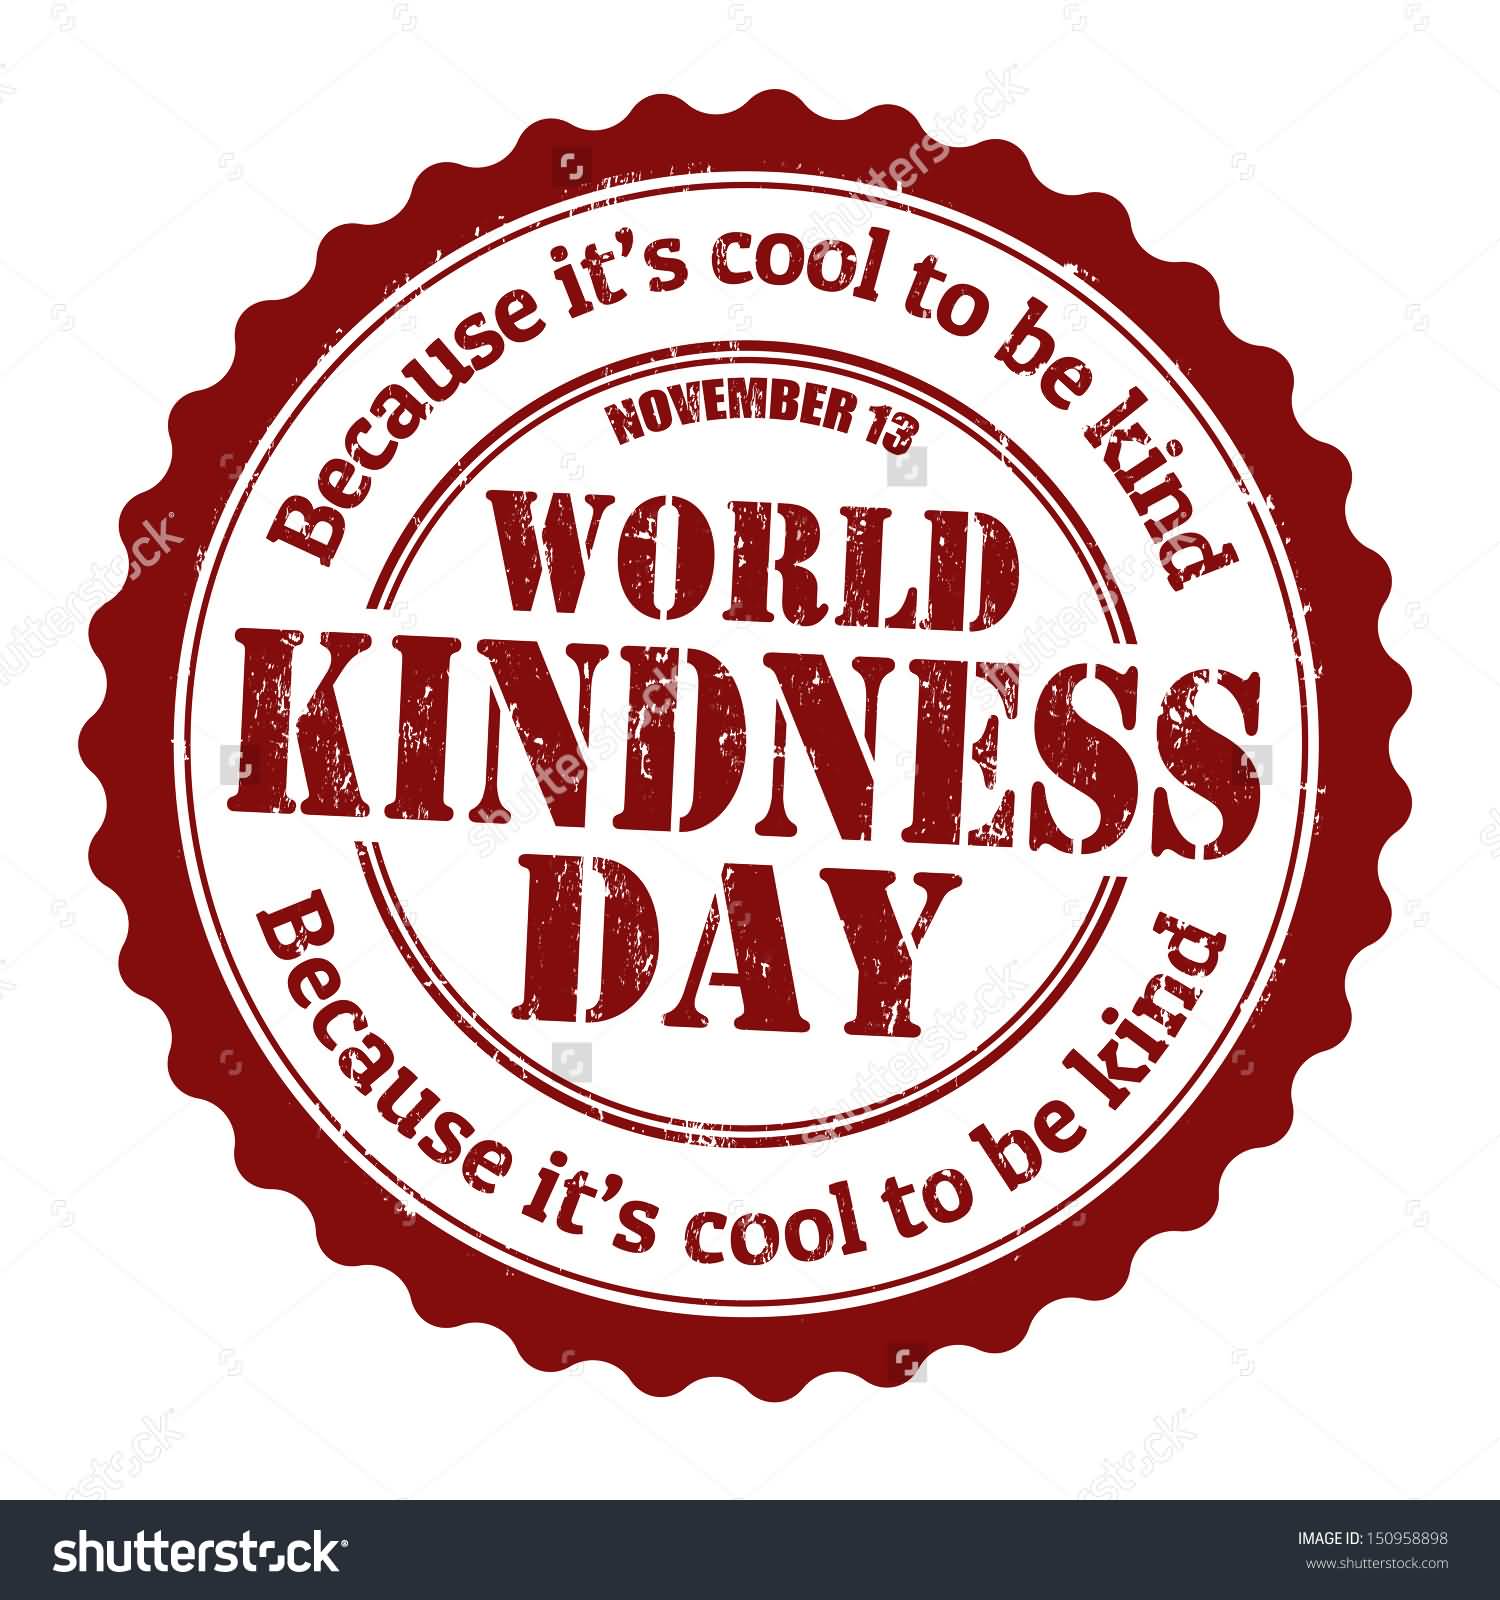 Because It’s Cool To Be Kin November 13 World Kindness Day Stamp Picture